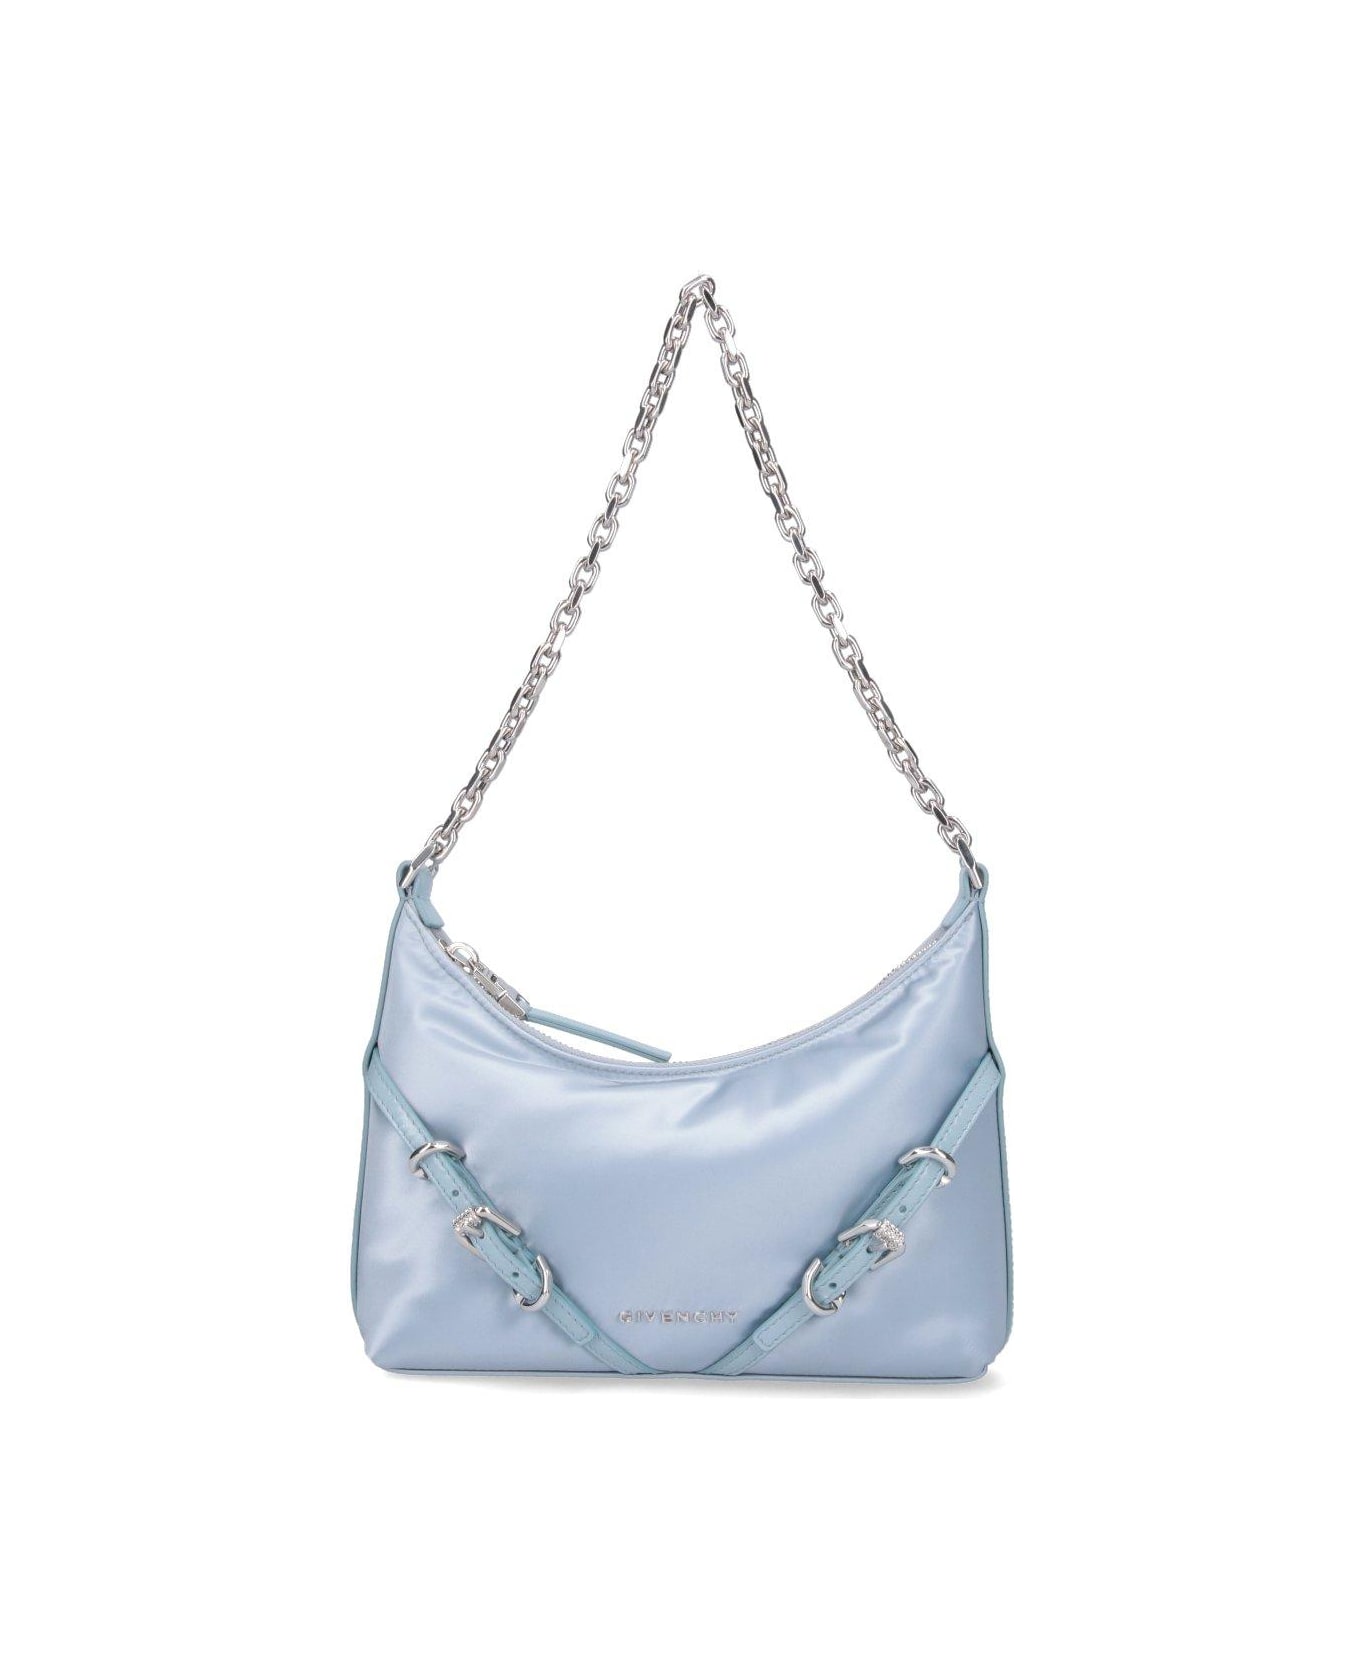 Givenchy Voyou Party Buckle Detailed Shoulder Bag - BABY BLUE